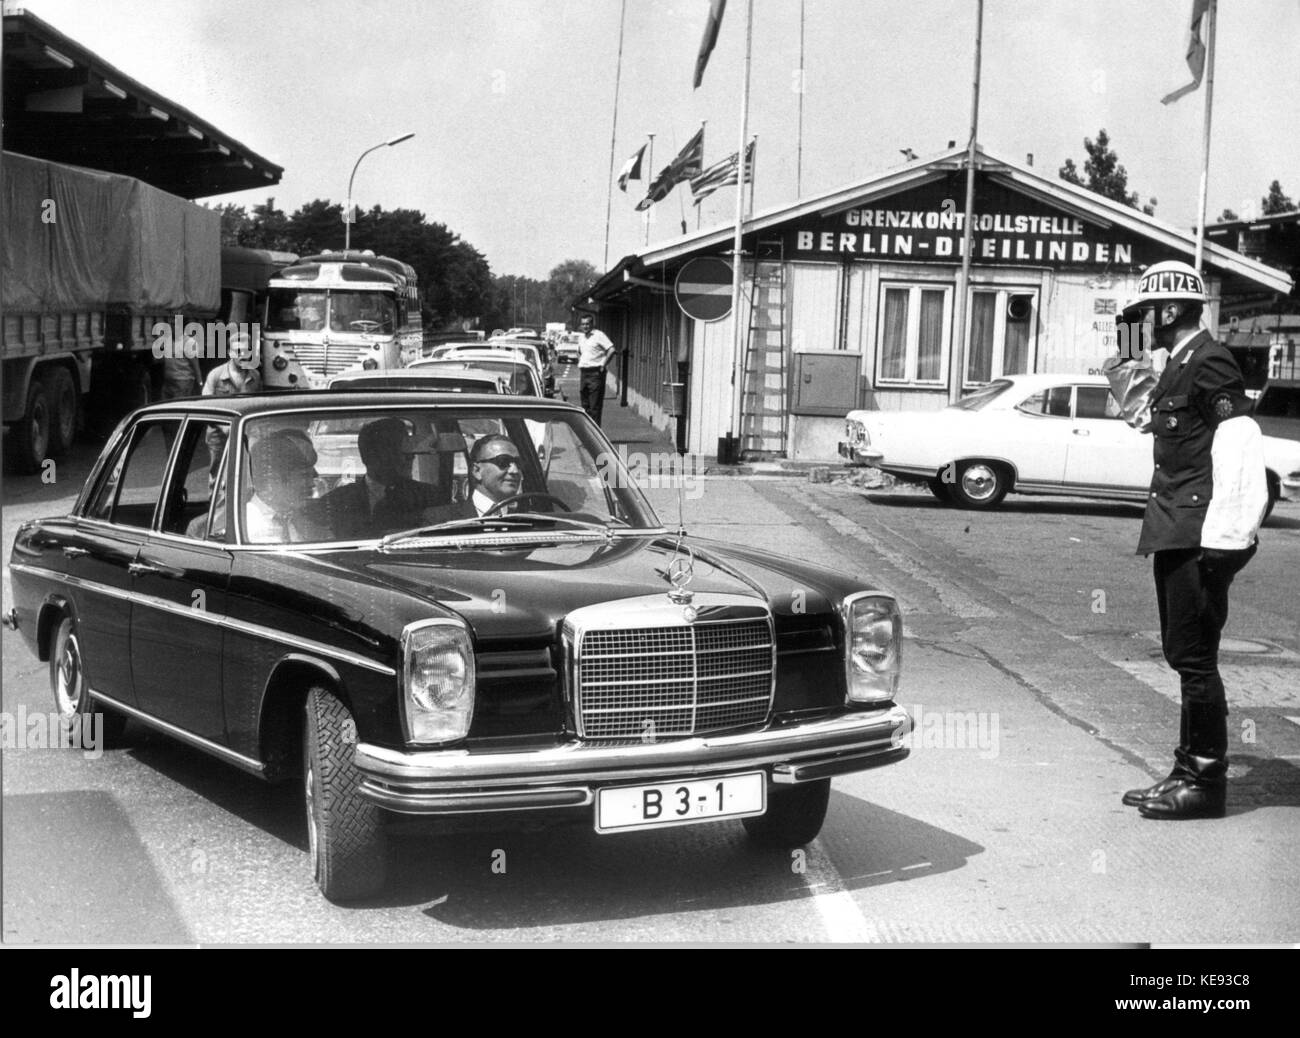 The limousine with Berlin's Lord Mayor Klaus Schuetz his wife Heide and his personal consultant Guenter Struve passes a saluting policeman at the check point 'Dreilinden' before entering the GDR in Berlin, Germany, 14 June 1969. Klaus Schuetz (of Germany's Social Democratic Party SPD) was a close associate of late German Chancellor Willy Brandt. He succeeded Mr Albertz as Berlin's Lord Mayor in 1967 and led the city government until his resignation on May 2nd 1977. The same year he was appointed German ambassador in Israel, an office he held until 1981. From 1981 to 1987 he served as director  Stock Photo